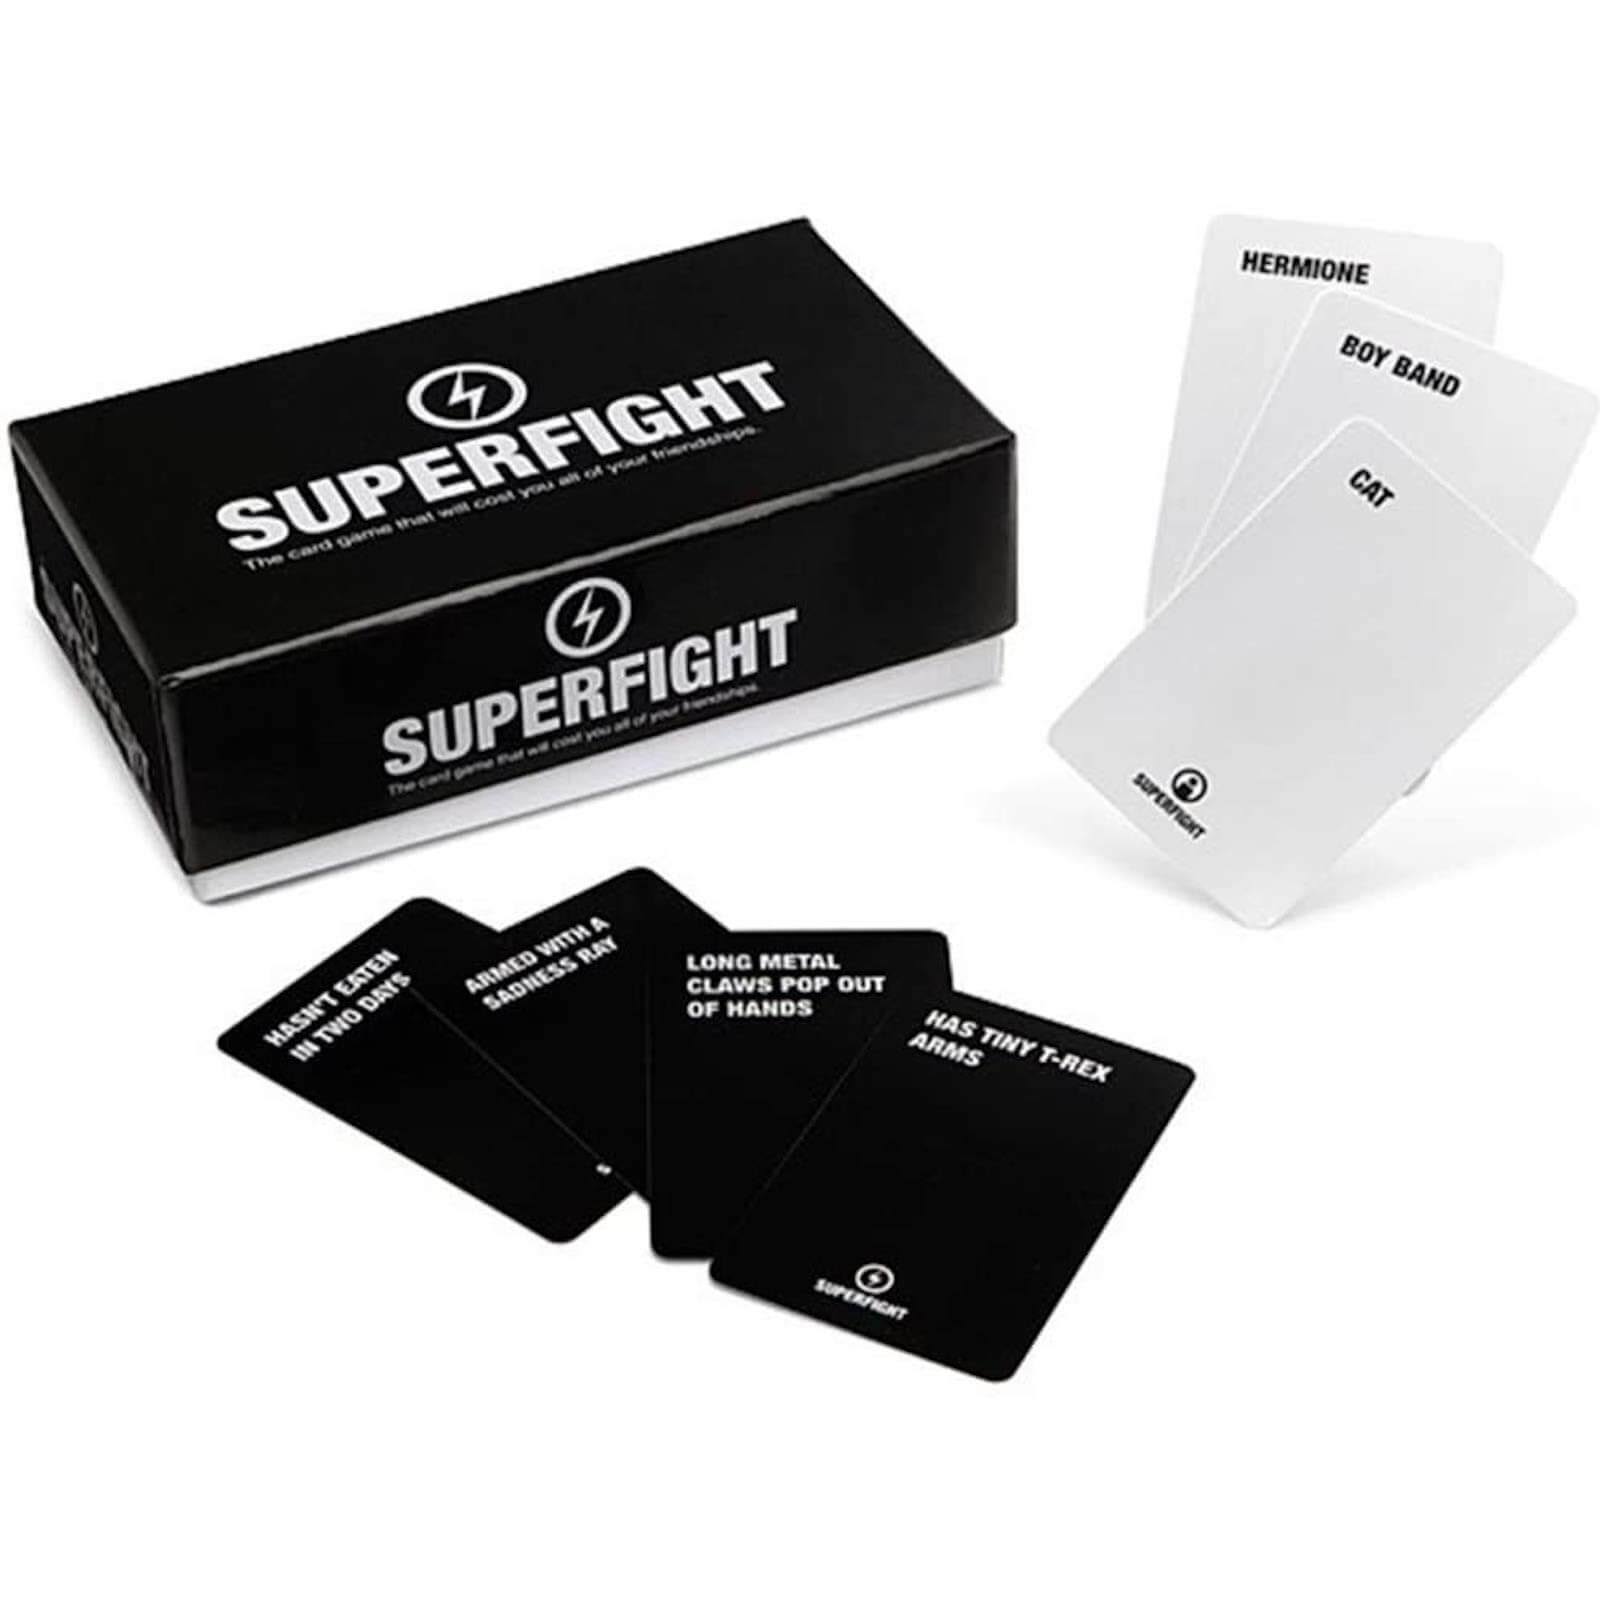 Superfight The Card Game Core Deck